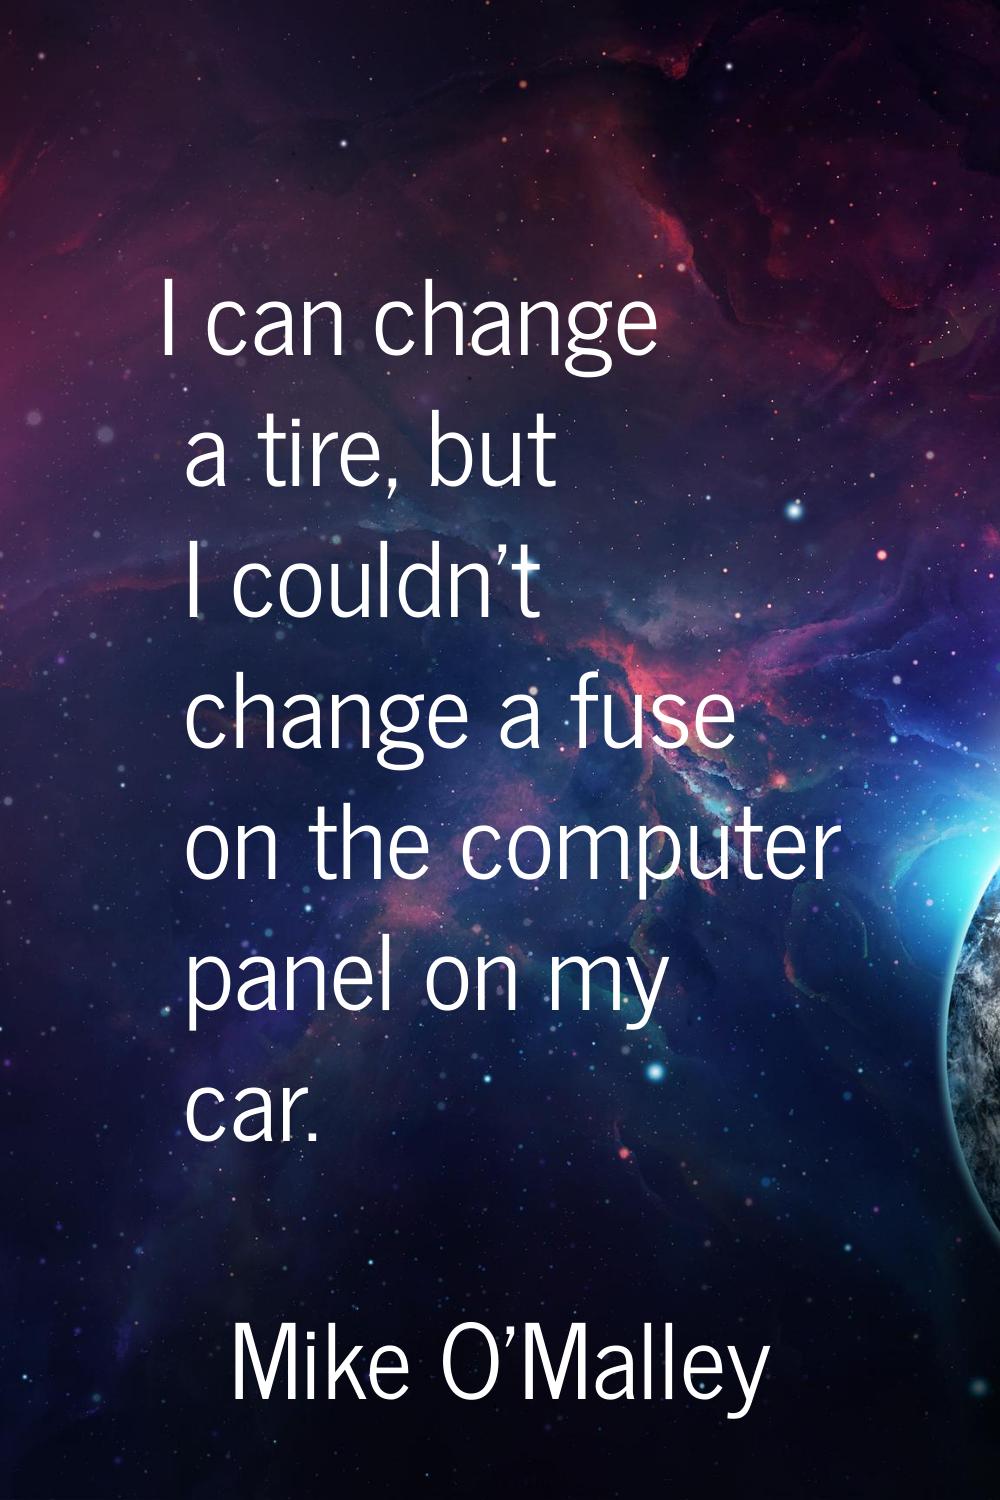 I can change a tire, but I couldn't change a fuse on the computer panel on my car.